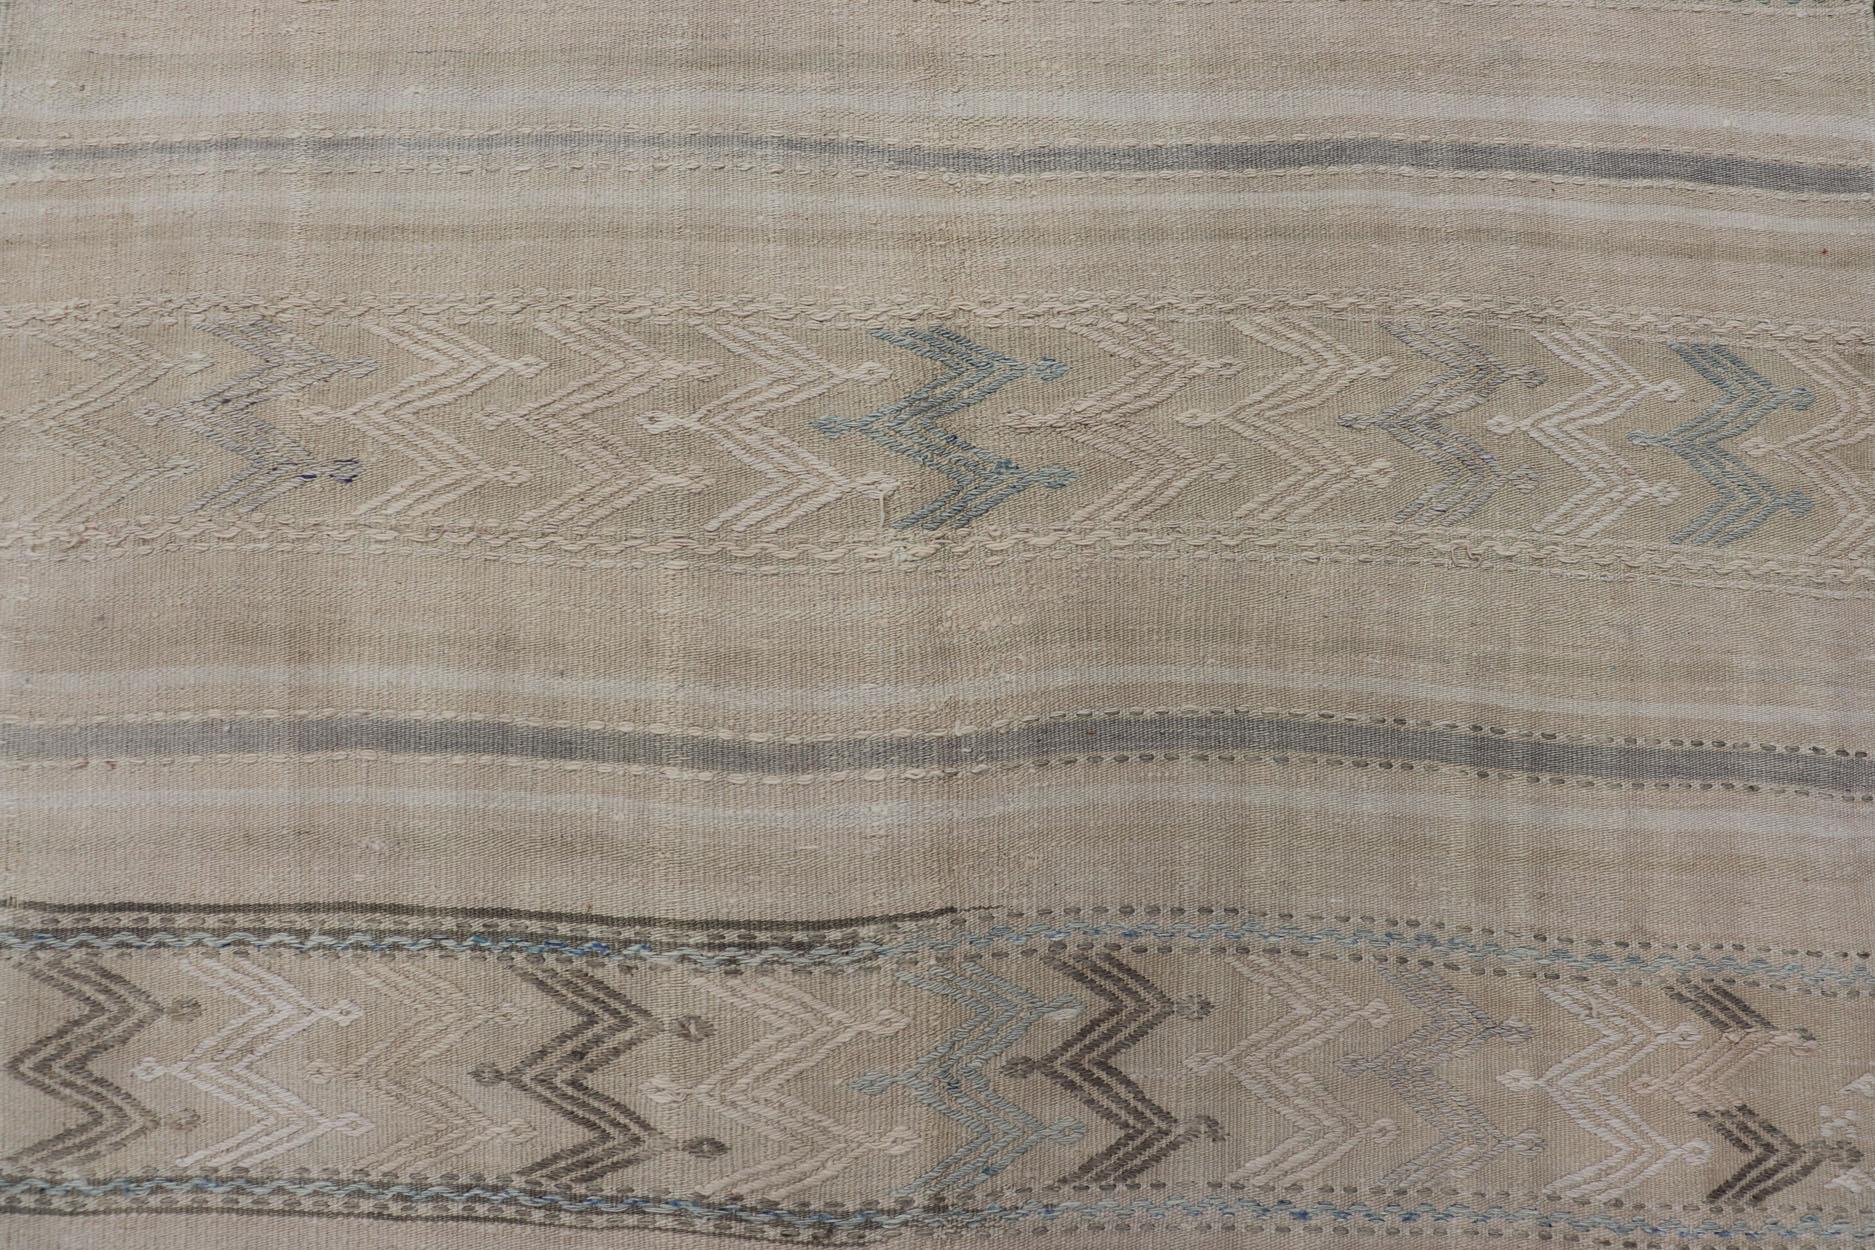 Turkish Flat-Weave Kilim with Tribal Embroideries in Taupe, Tan, Blue-Gray Color For Sale 4